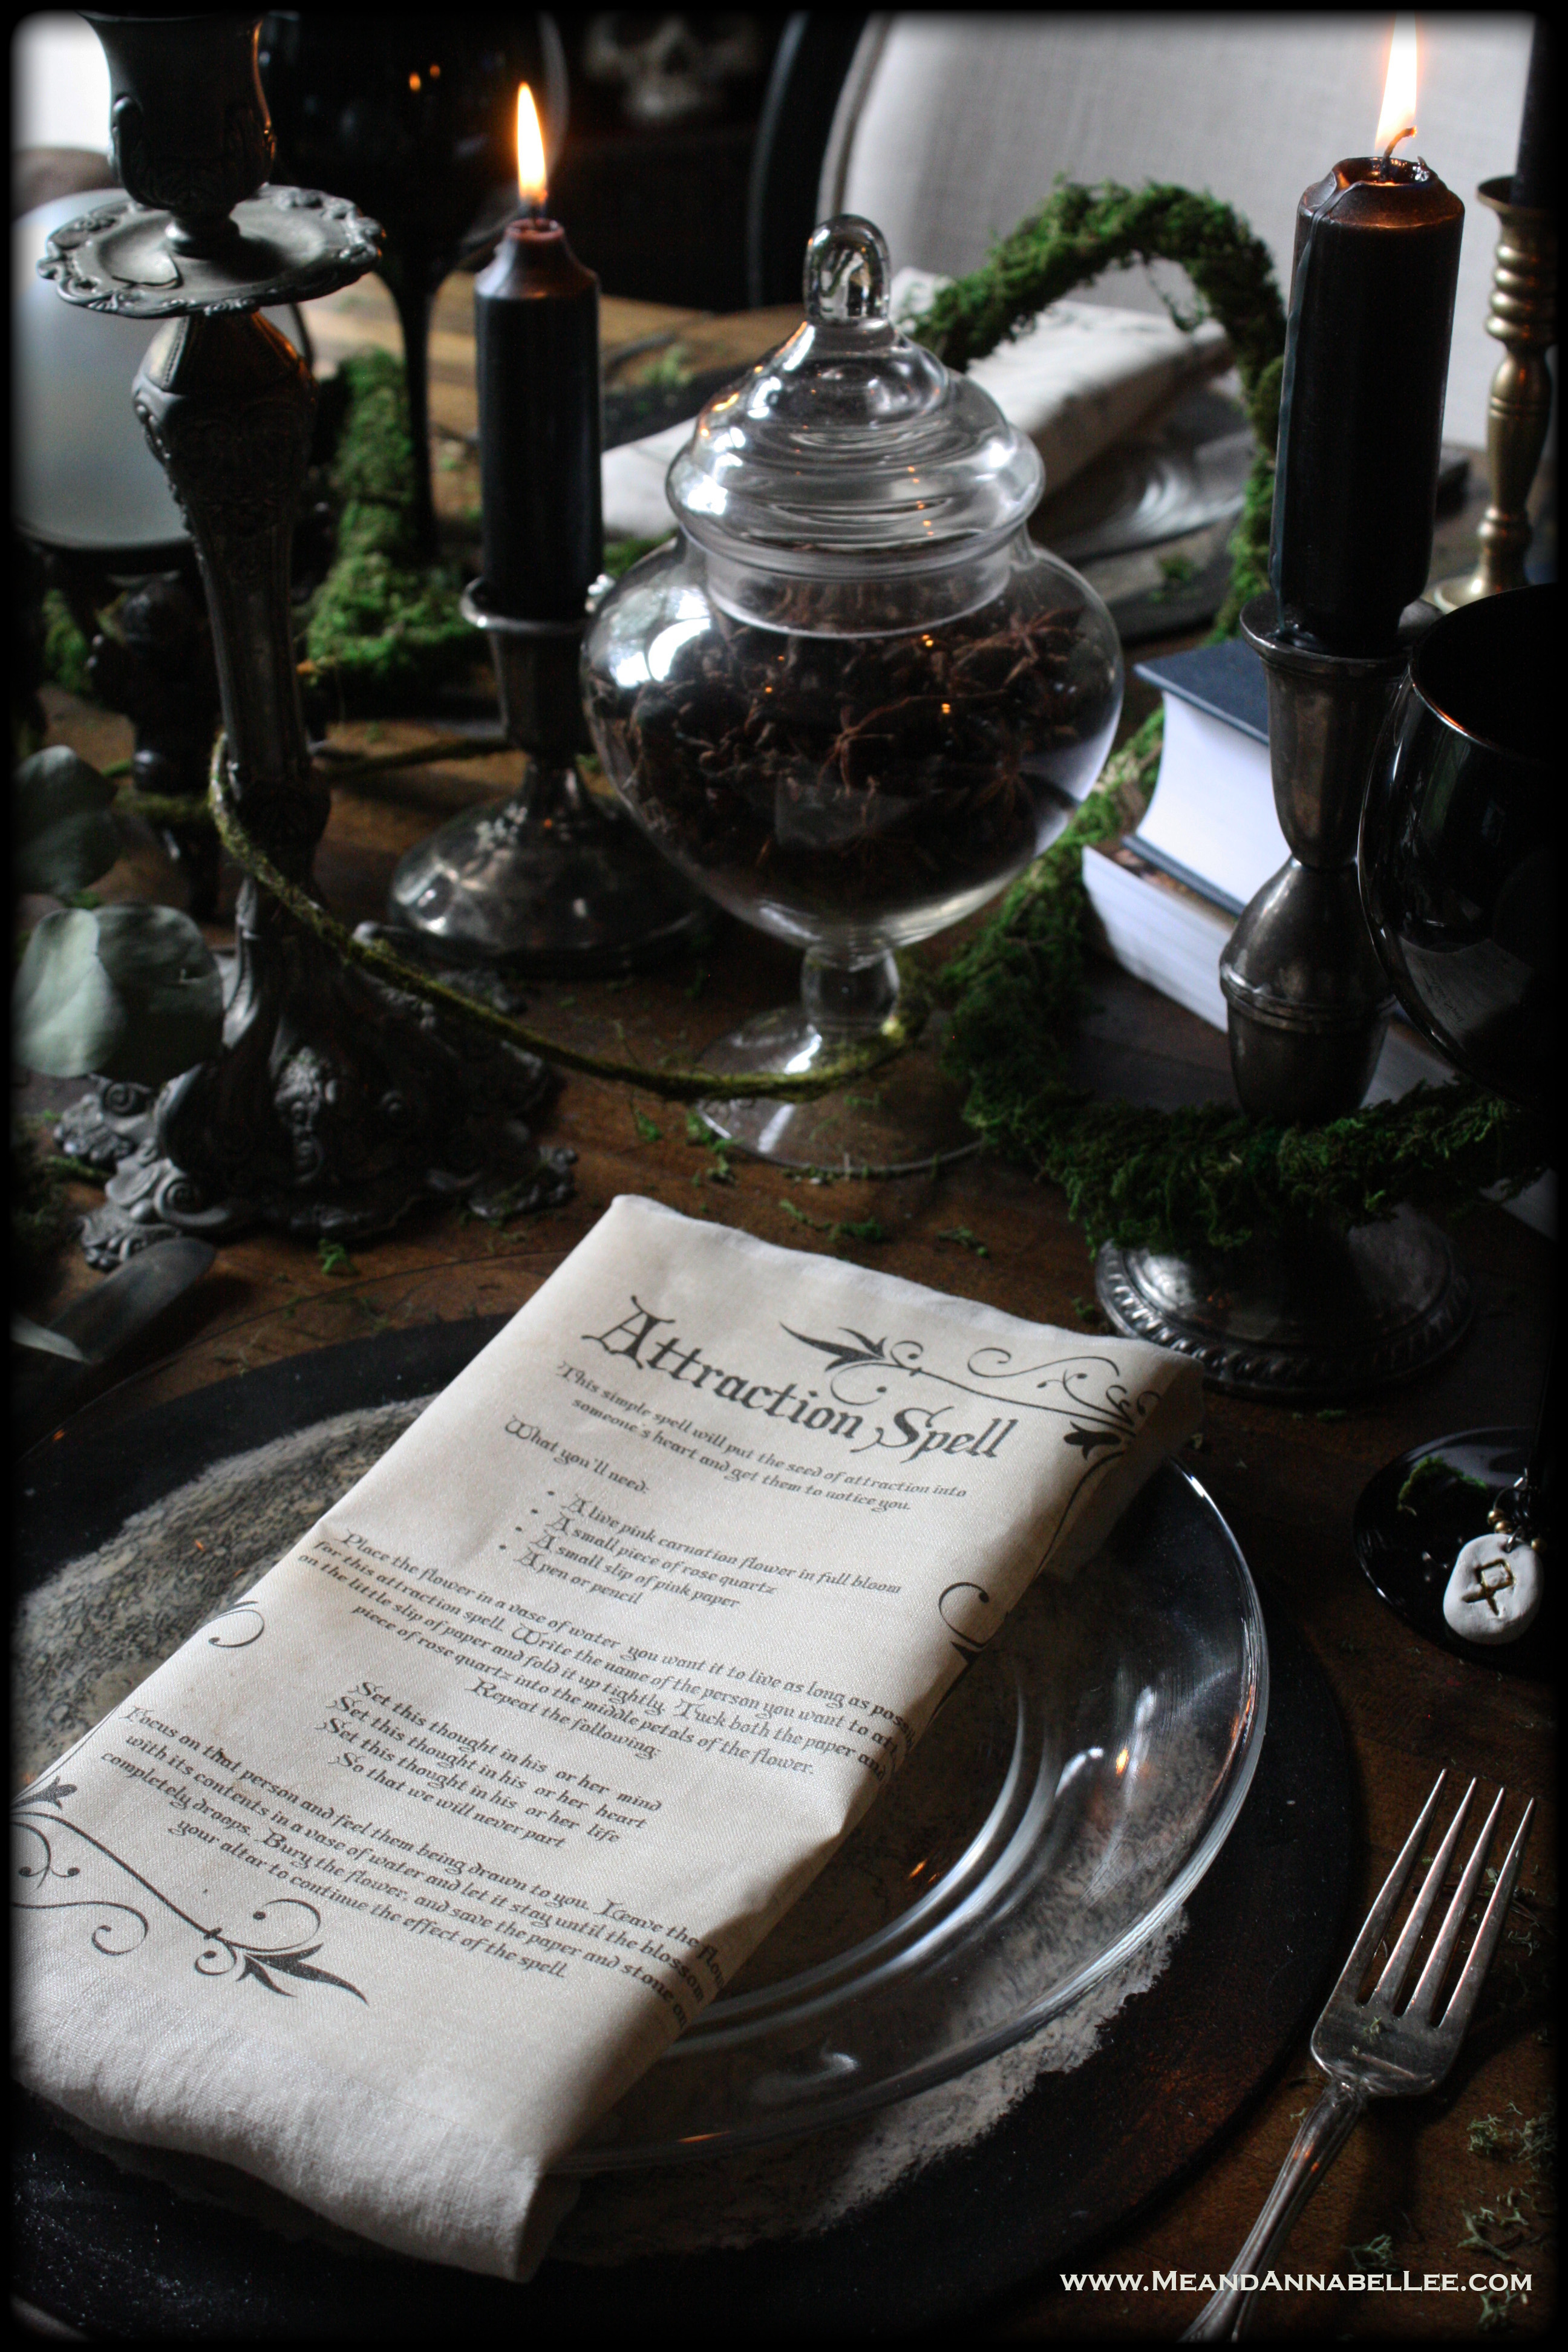 DIY Tea Stained Witches Spell Napkins | Magickal Halloween Dinner Party Table Setting | Attraction Love Spell | Witchcraft Iron On Image Transfer | www.MeandAnnabelLee.com